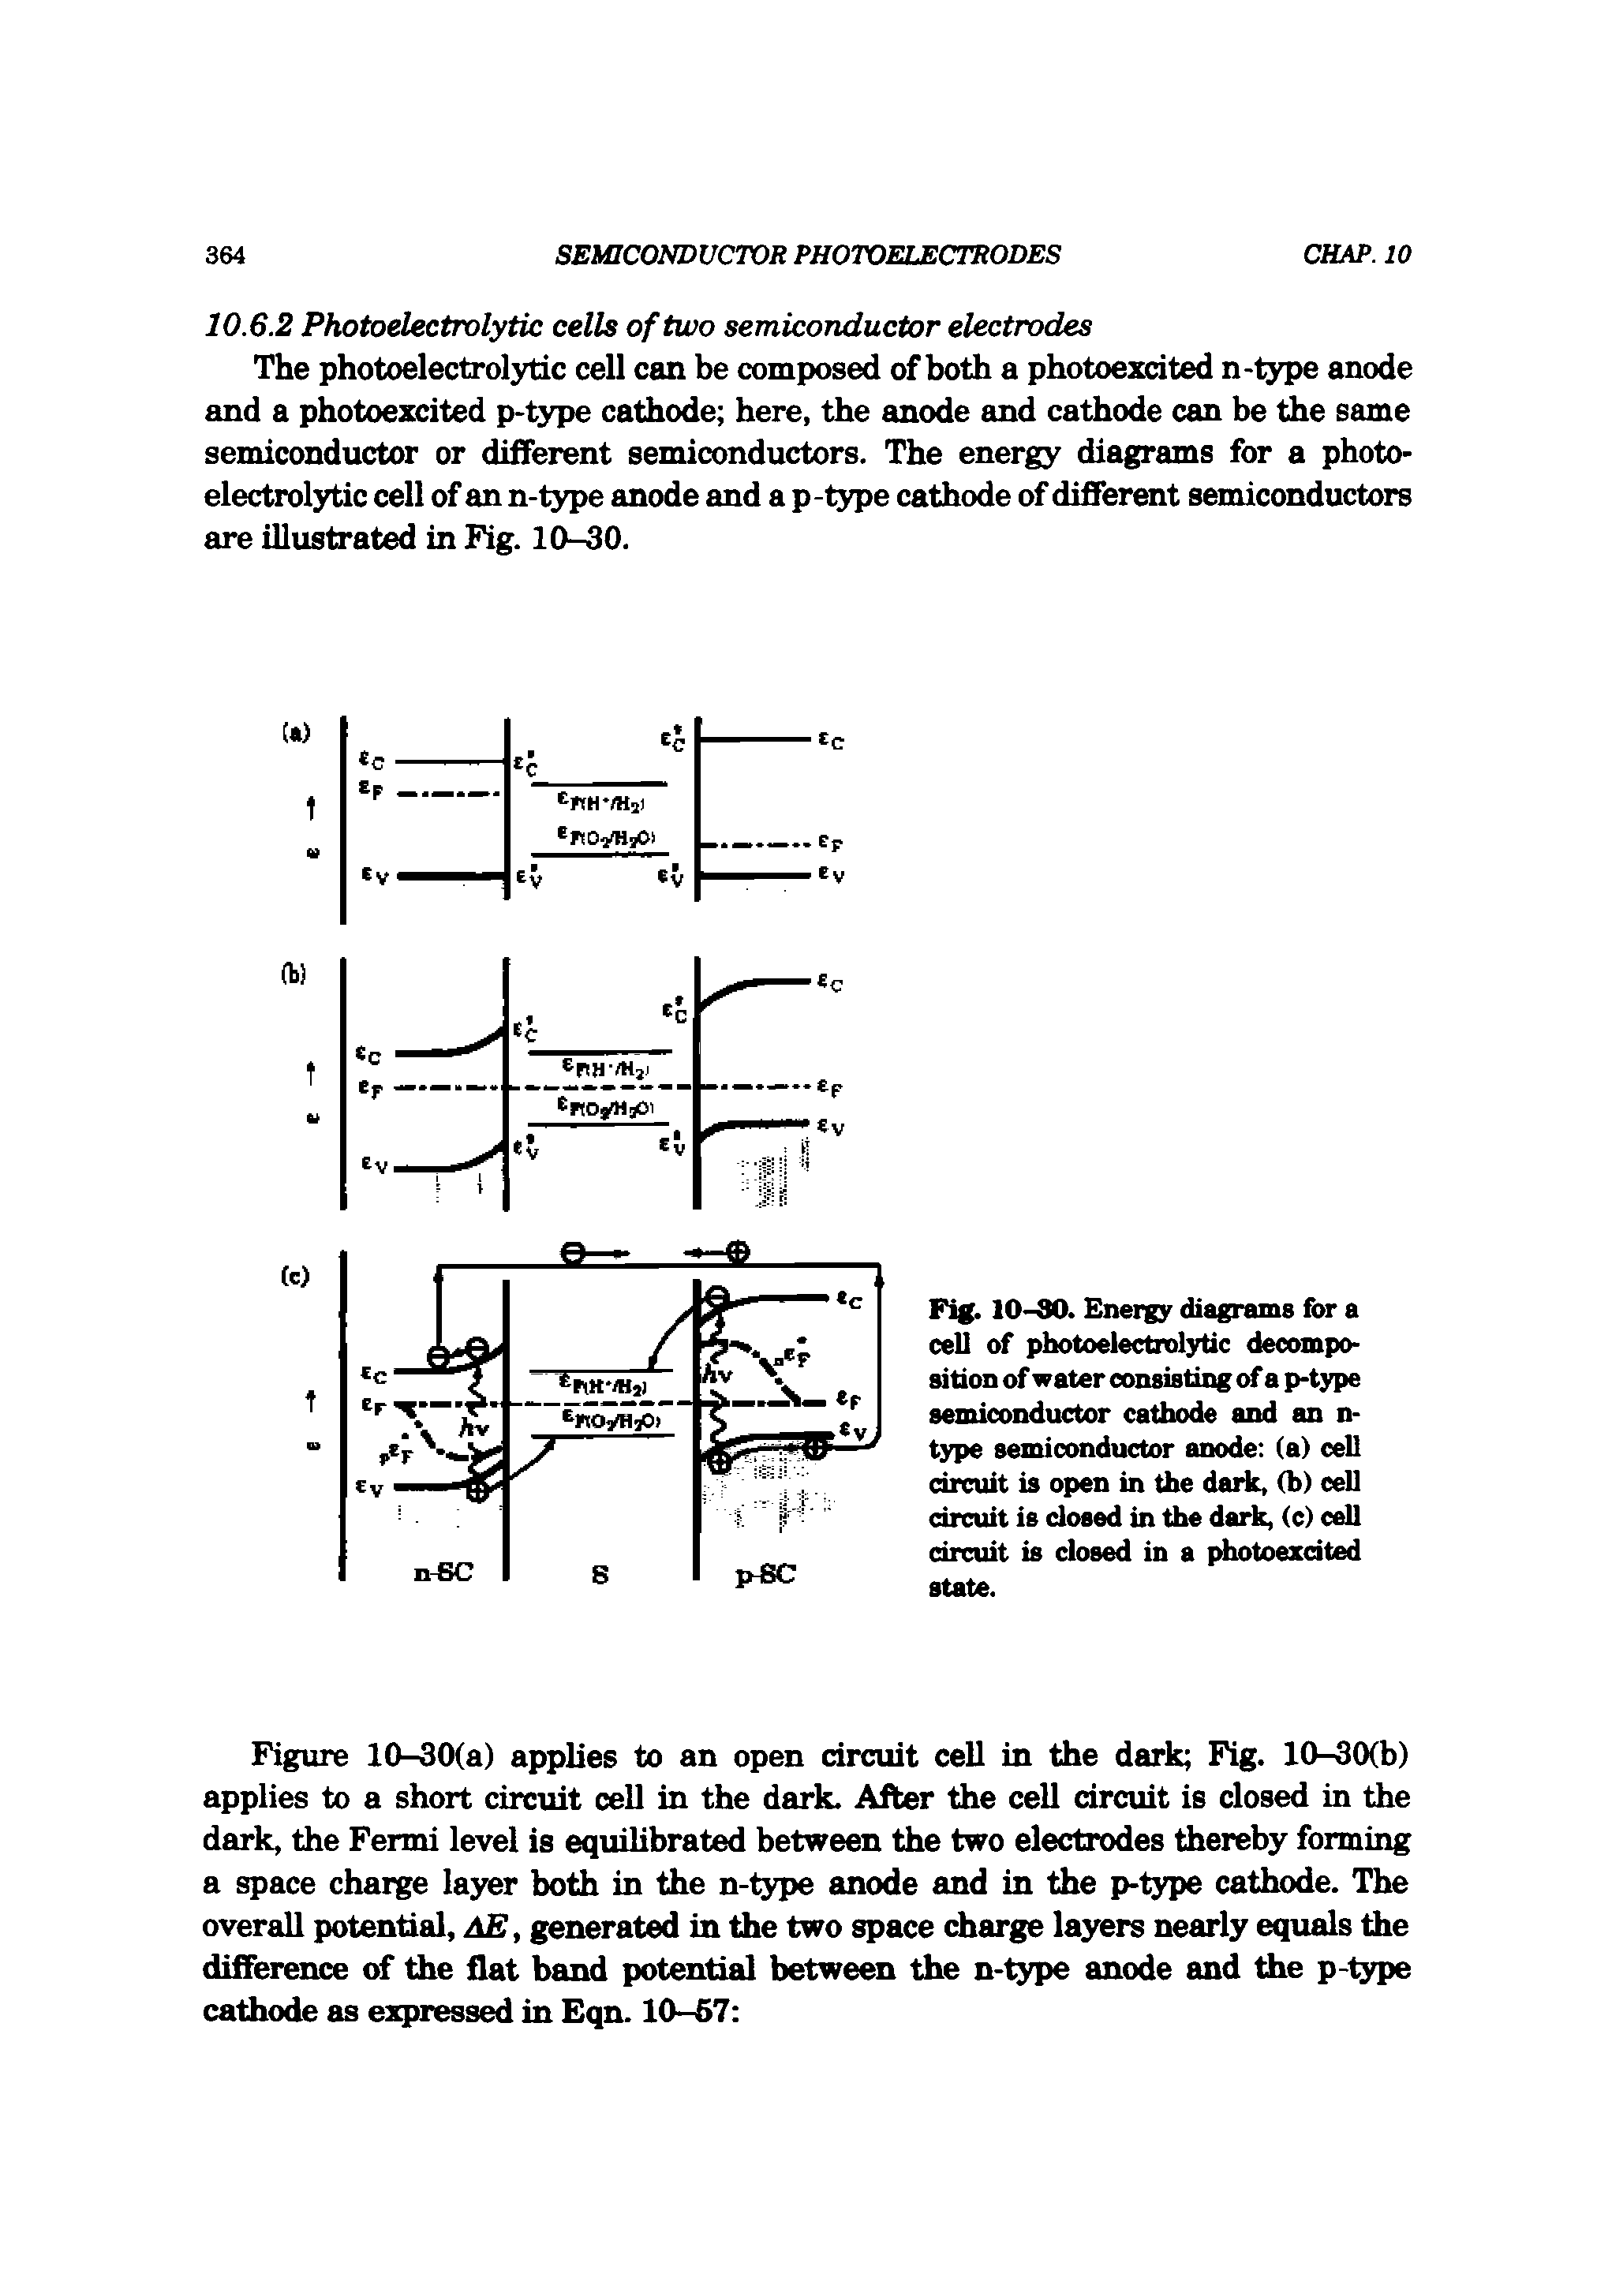 Fig. 10-80. Energy diagrams for a cell of photoelectrolytic decomposition of water consisting of a p-type semiconductor cathode and an n-type semiconductor anode (a) cell circuit is open in the daric, (b) cell circuit is closed in the dark, (c) cell circuit is closed in a i toexdted state.